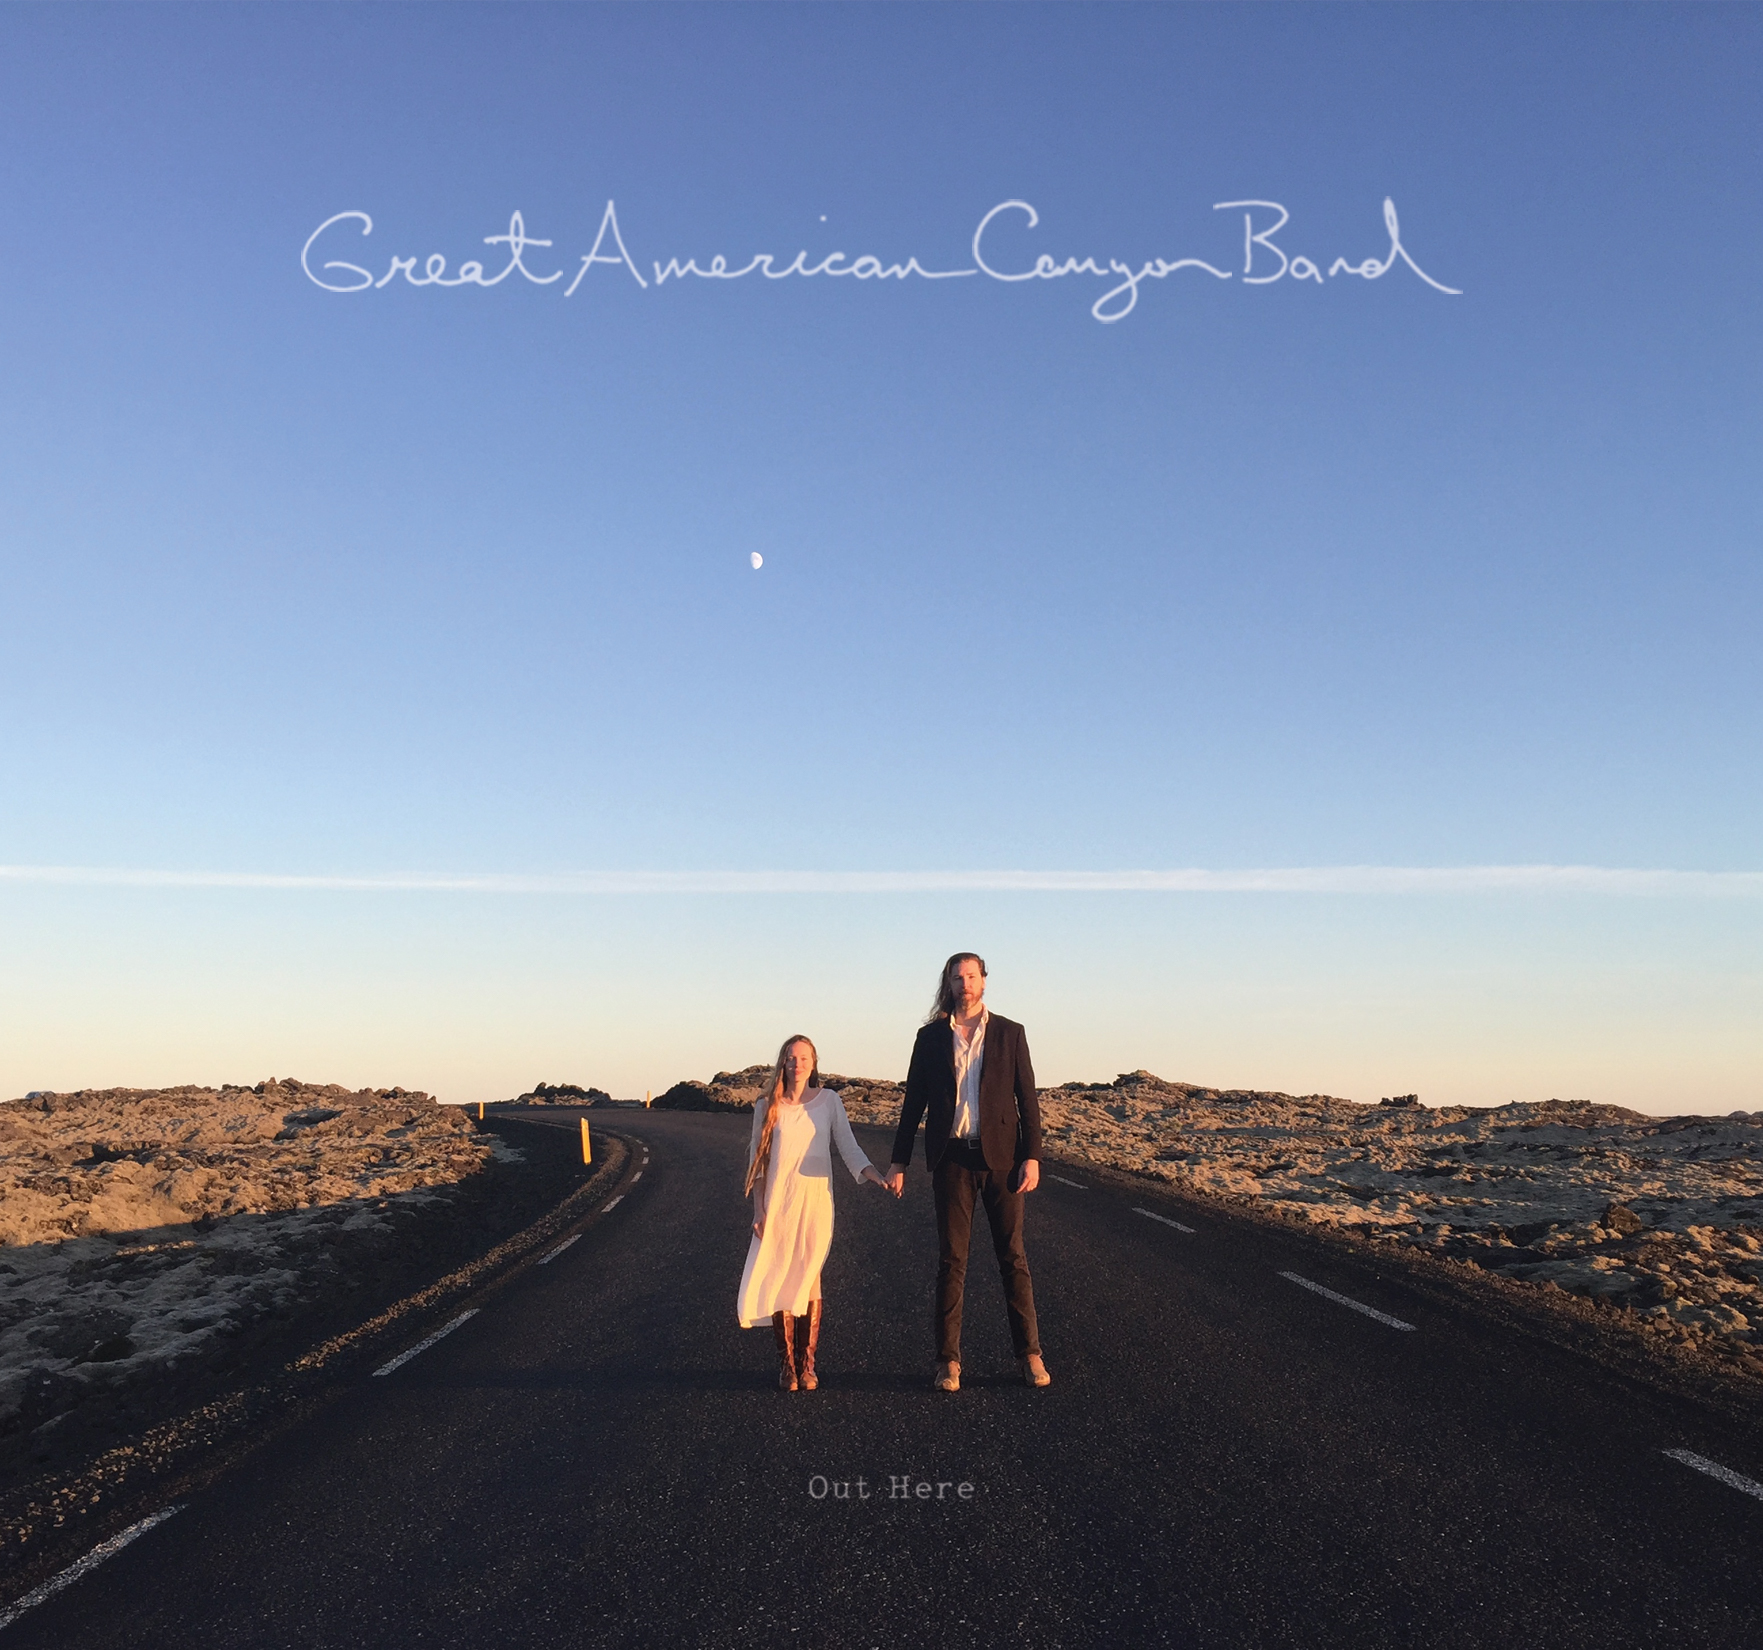 Great American Canyon Band release new EP “Out Here” – OUT NOW